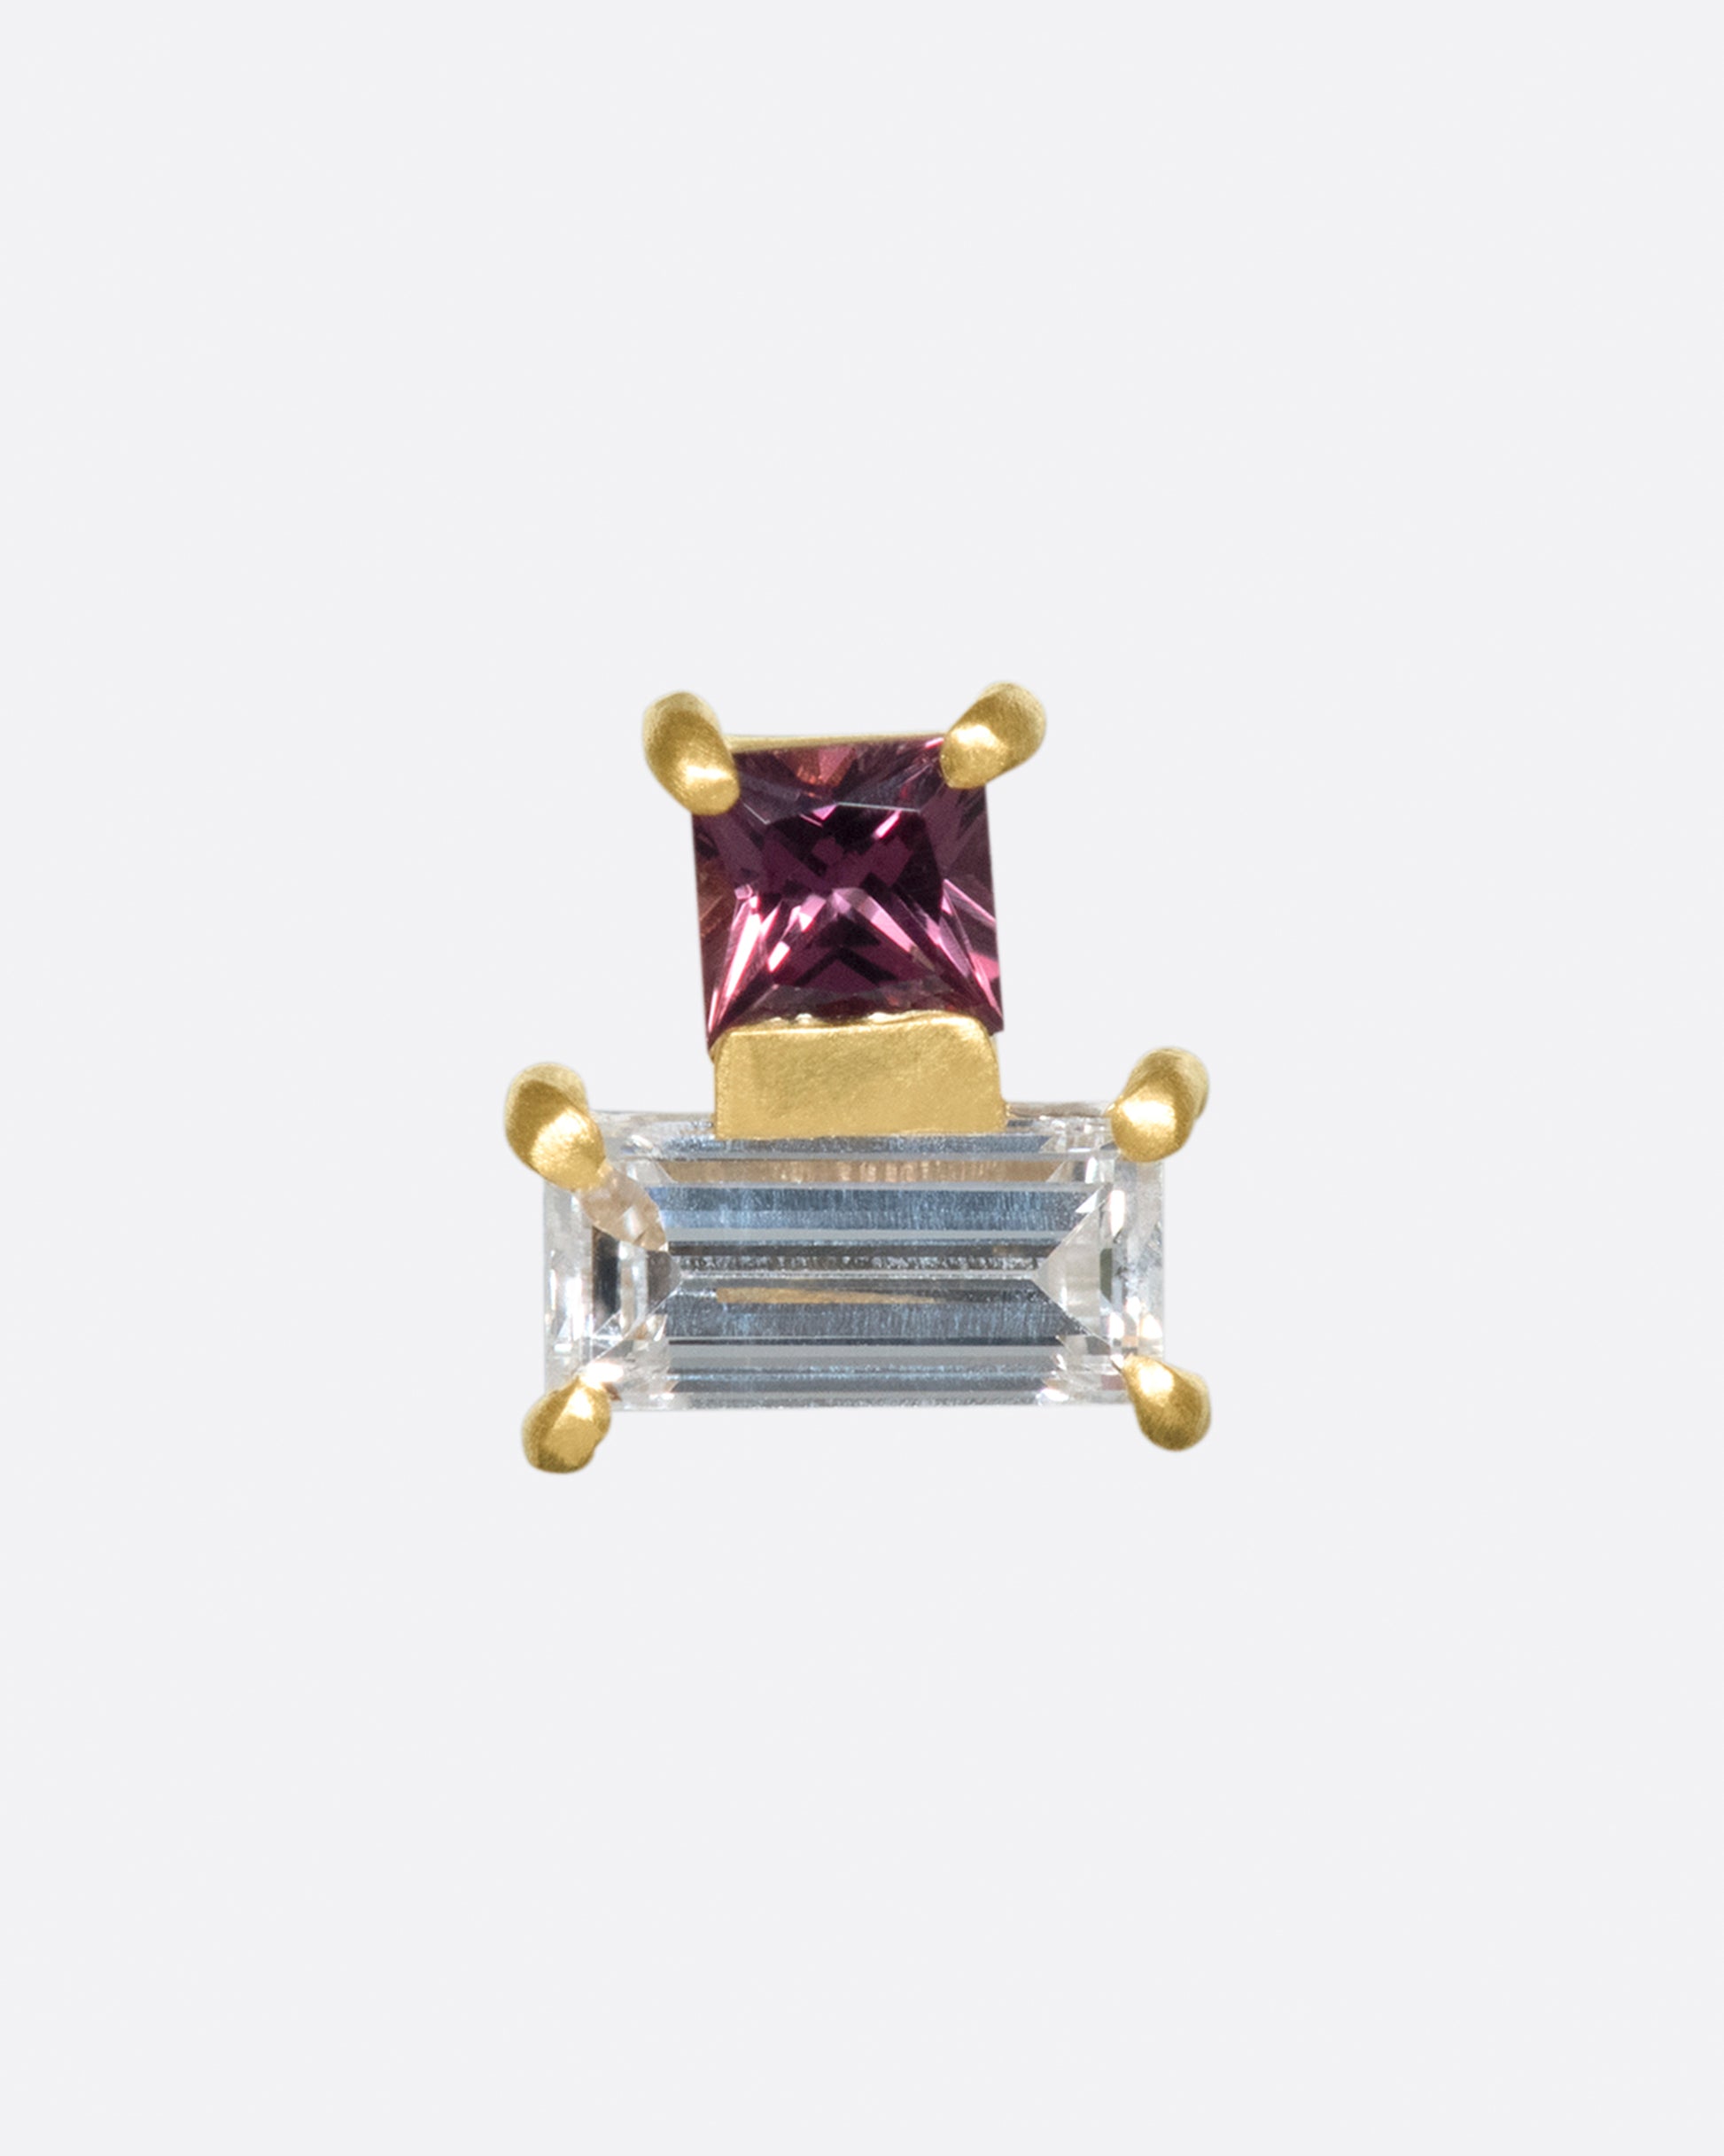 A princess cut, mauve-y pink sapphire sits centered atop a diamond baguette. That said, this piece looks beautiful at every angle.